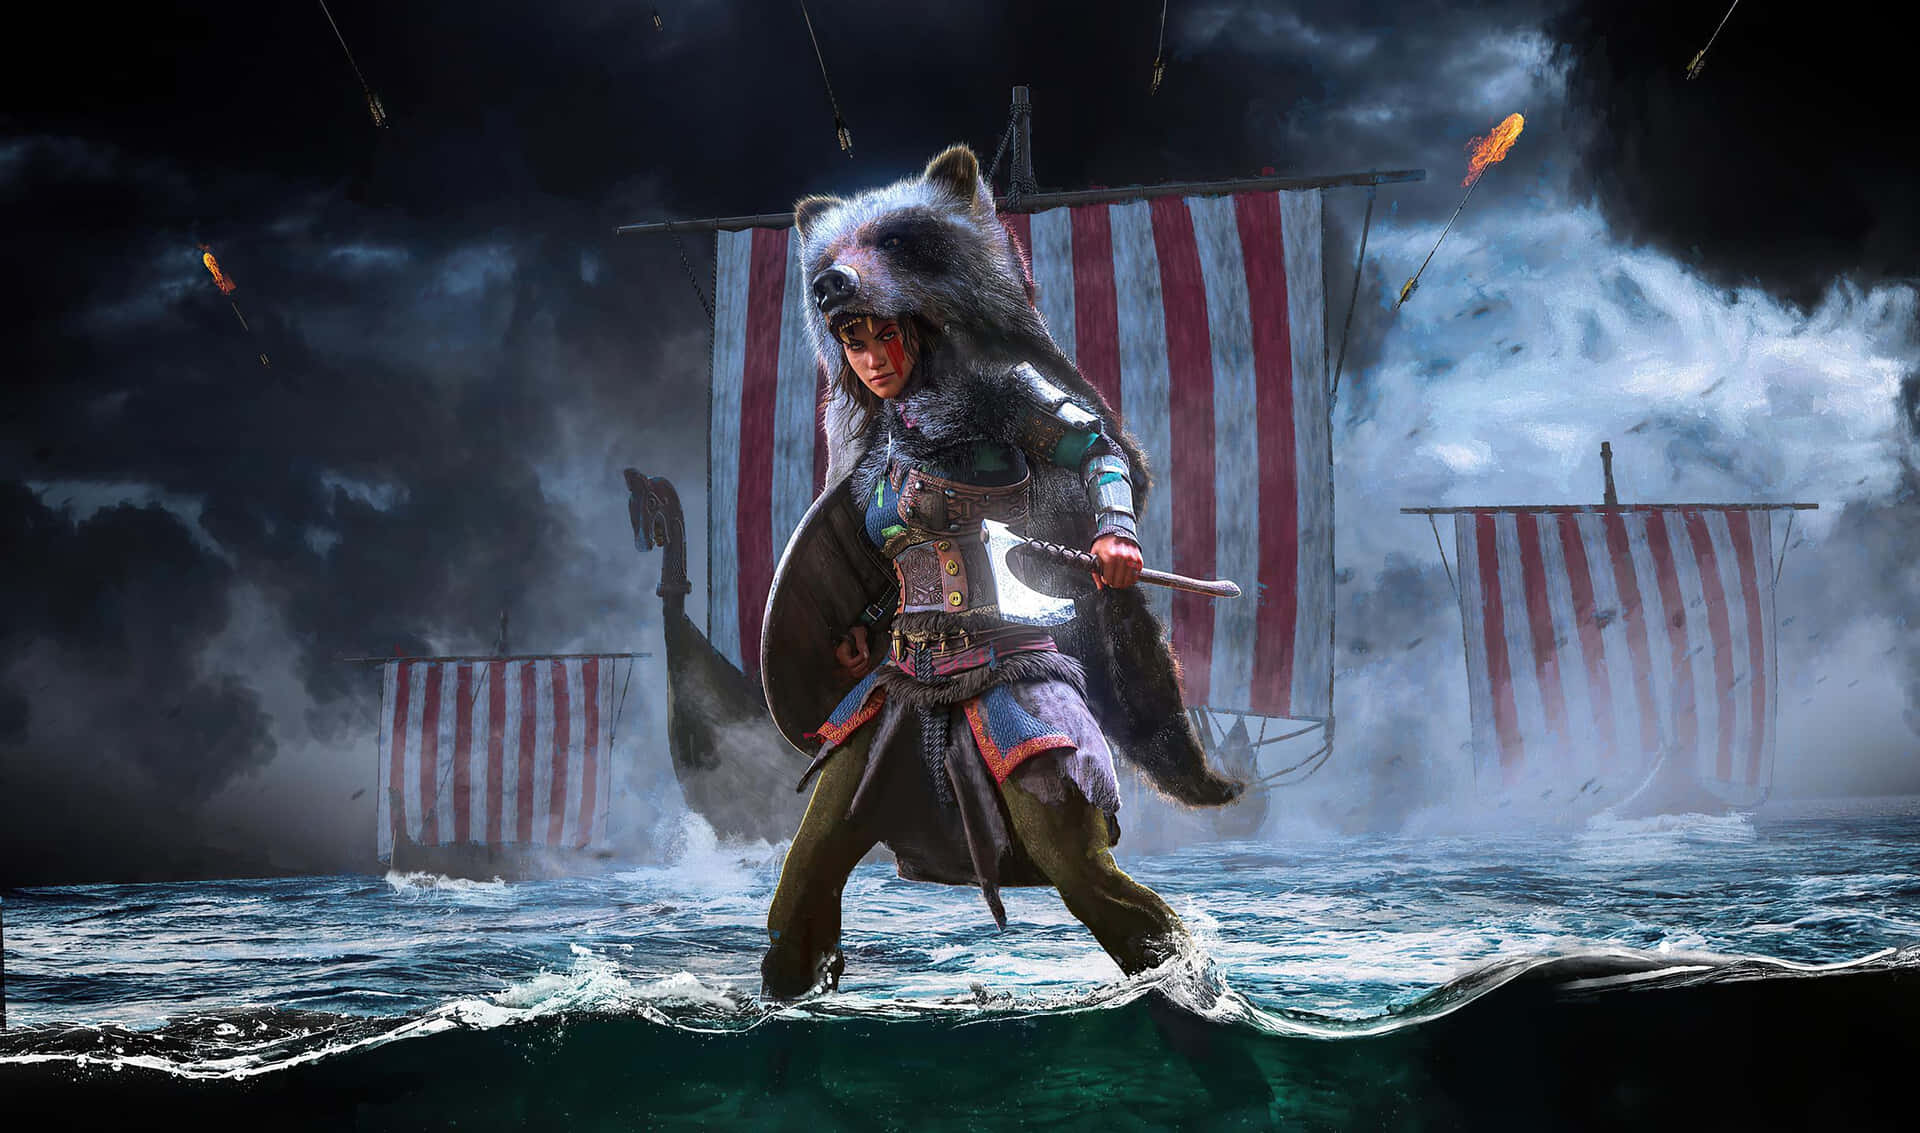 A Viking In A Costume Standing In The Water